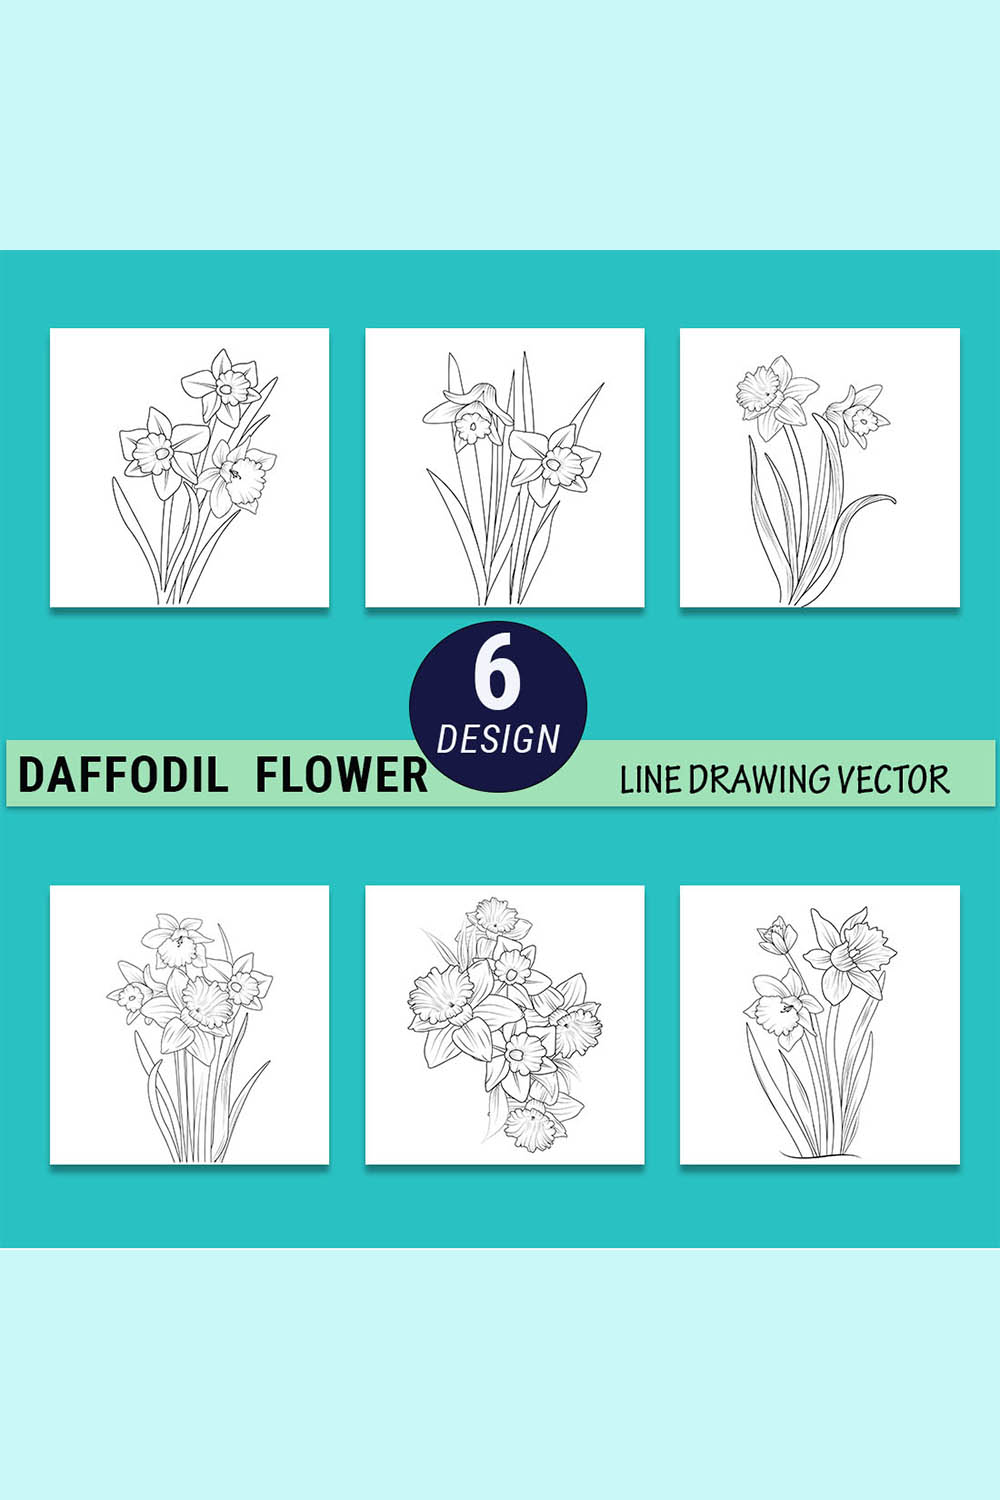 Daffodil flower, daffodil, daffodil line art, daffodil flower coloring pages, daffodil drawings, yellow daffodil, daffodil outline, scientific daffodil botanical illustration pinterest preview image.